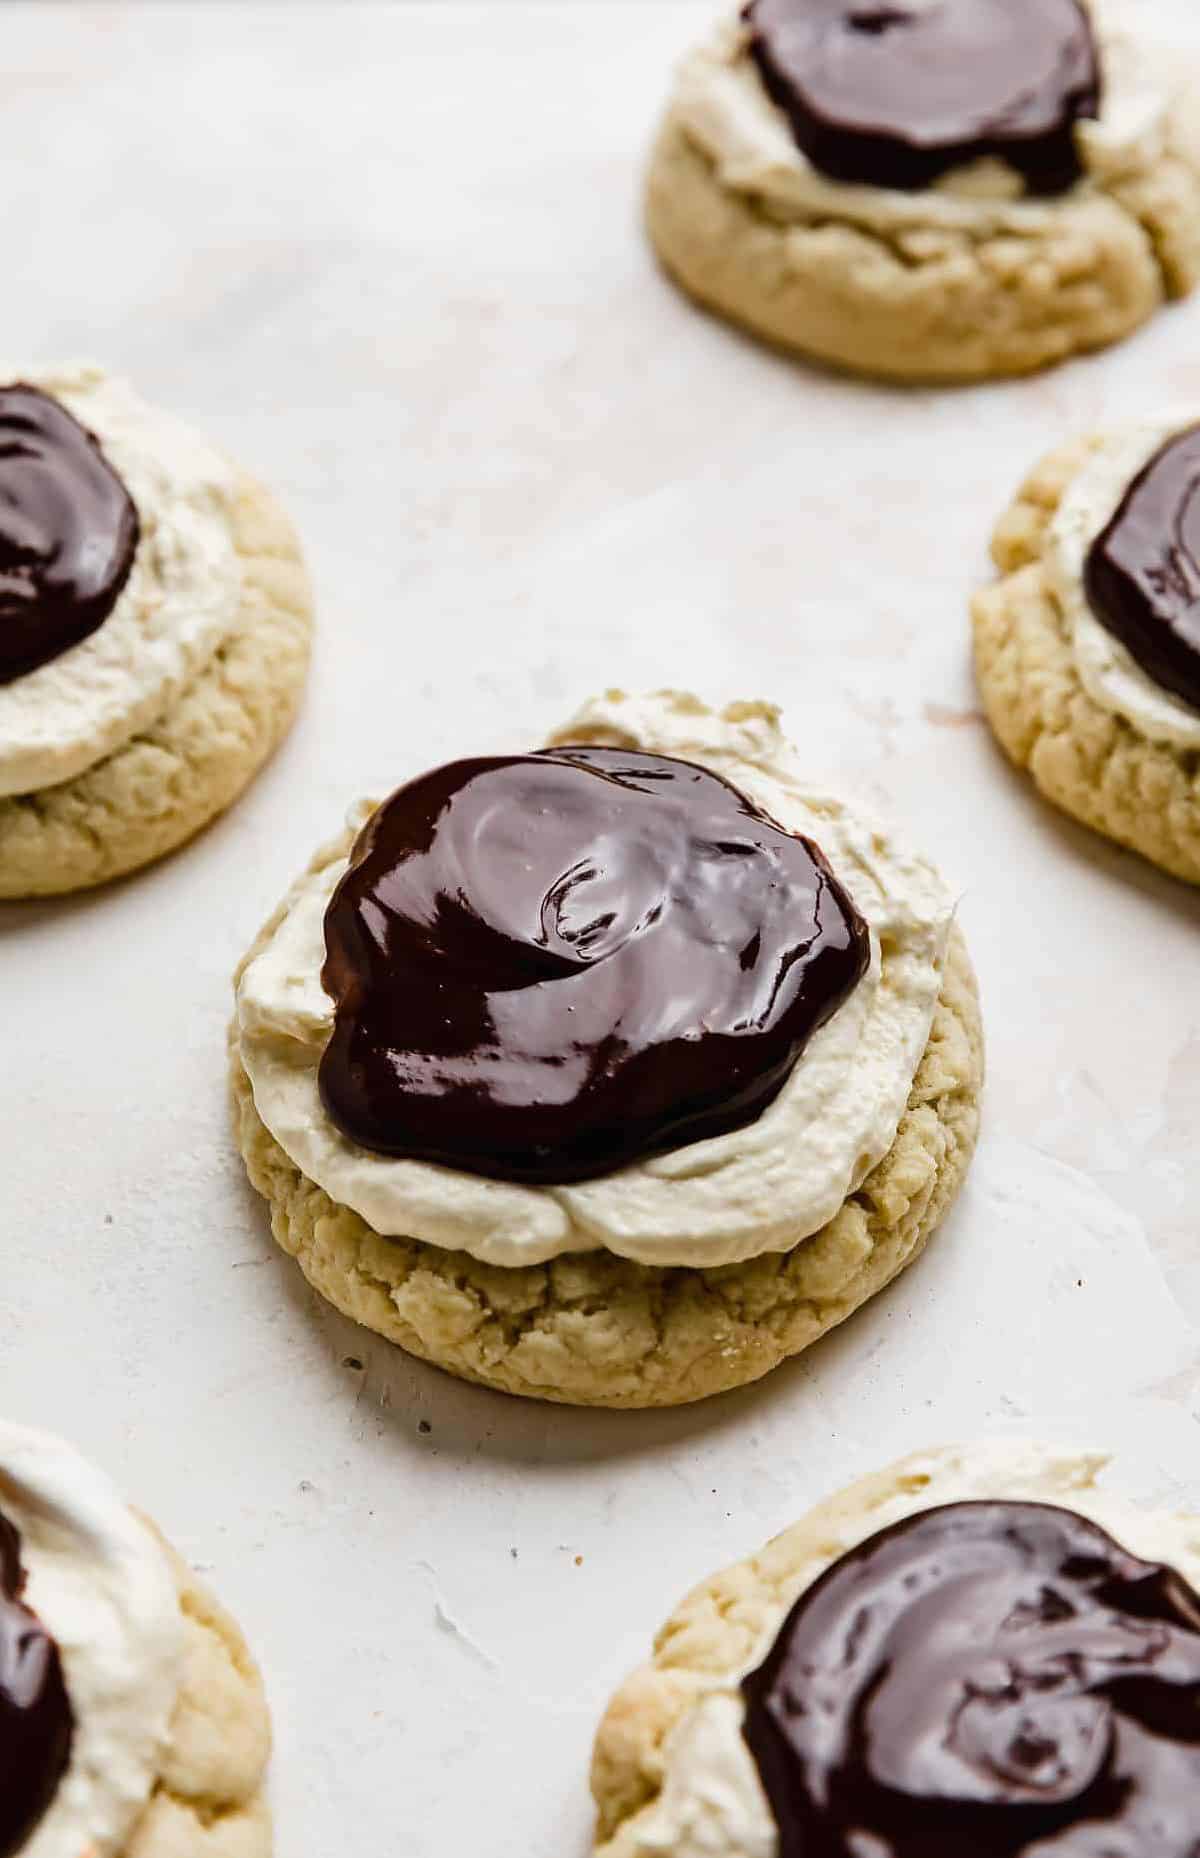  Satisfy your sweet tooth with these Boston Cream Cookies.